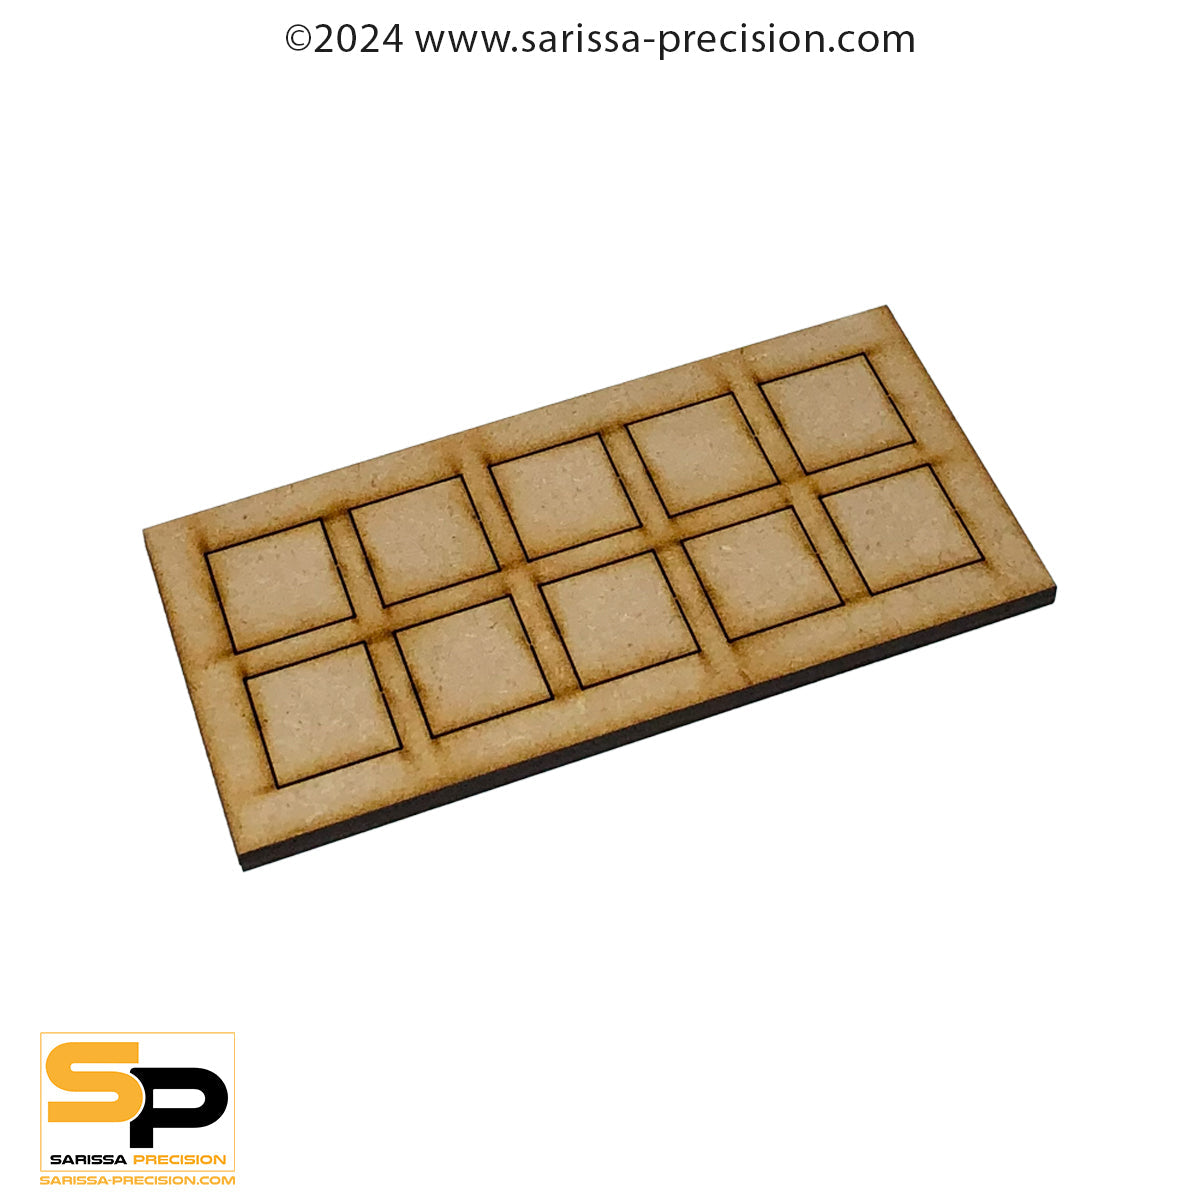 7x1 25x25mm Conversion Tray for 20x20mm bases